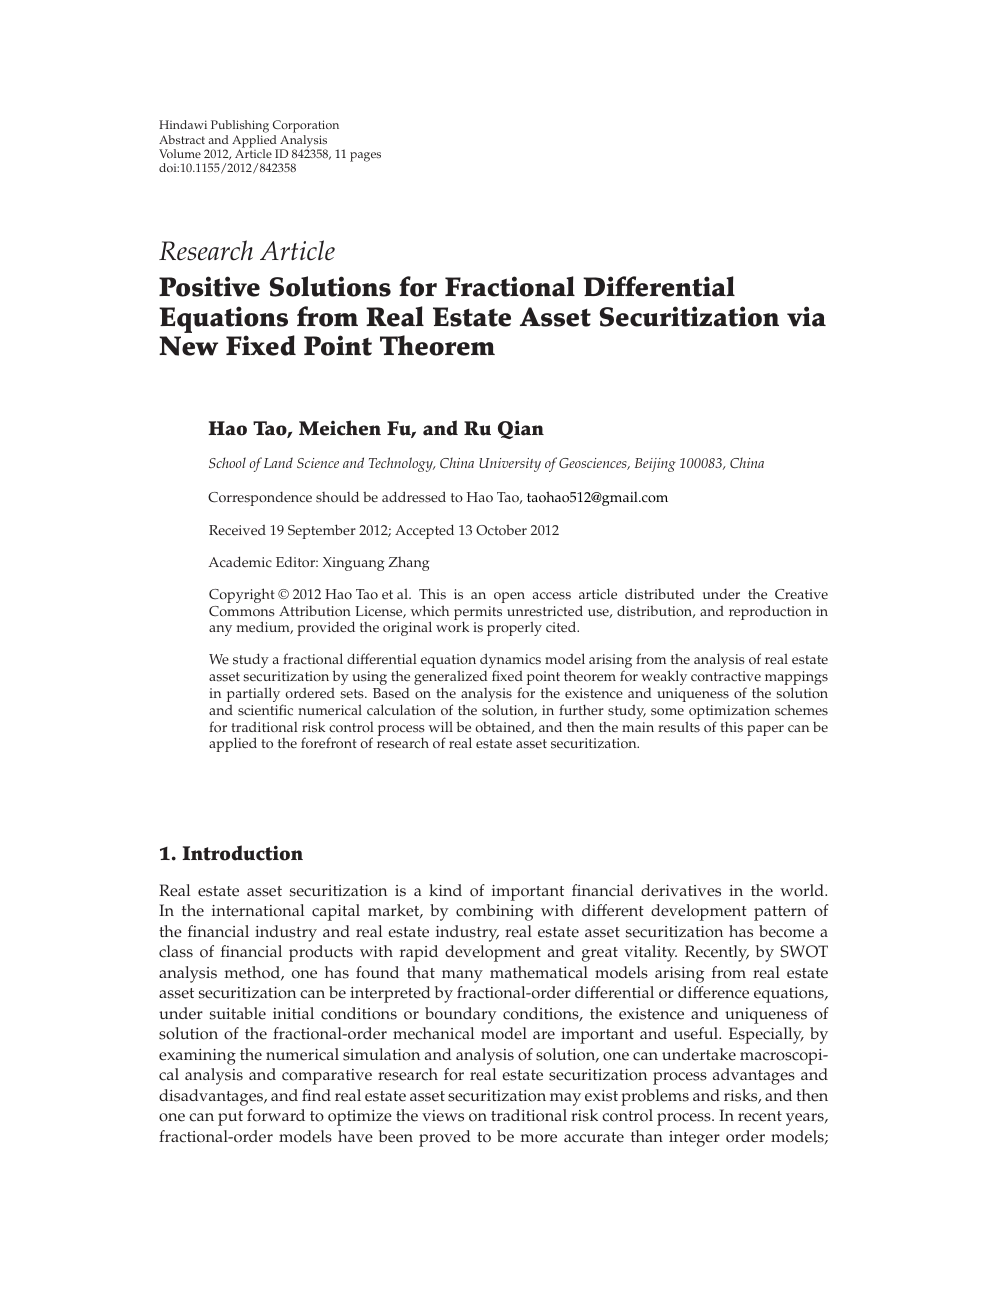 Positive Solutions For Fractional Differential Equations From Real Estate Asset Securitization Via New Fixed Point Theorem Topic Of Research Paper In Mathematics Download Scholarly Article Pdf And Read For Free On